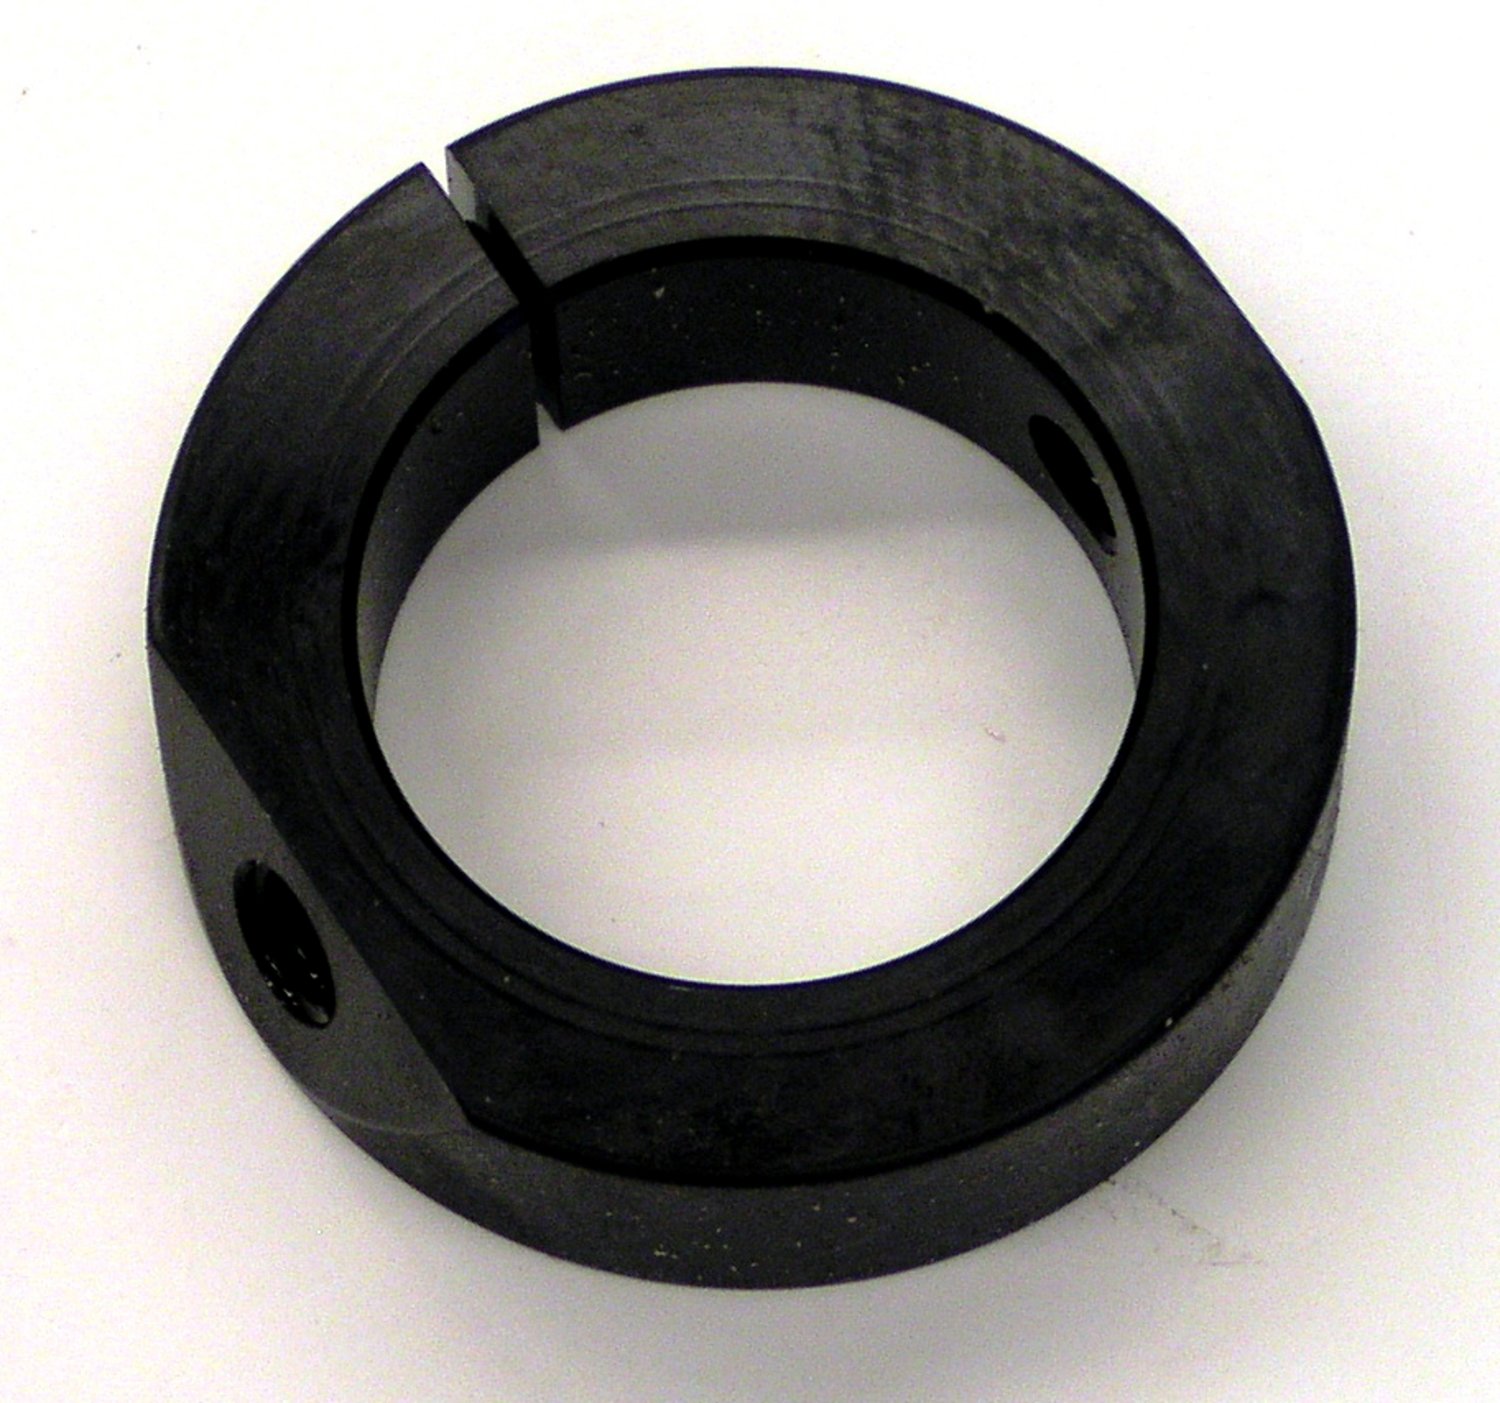 7010362691 - 3M Support Handle Ring 30380